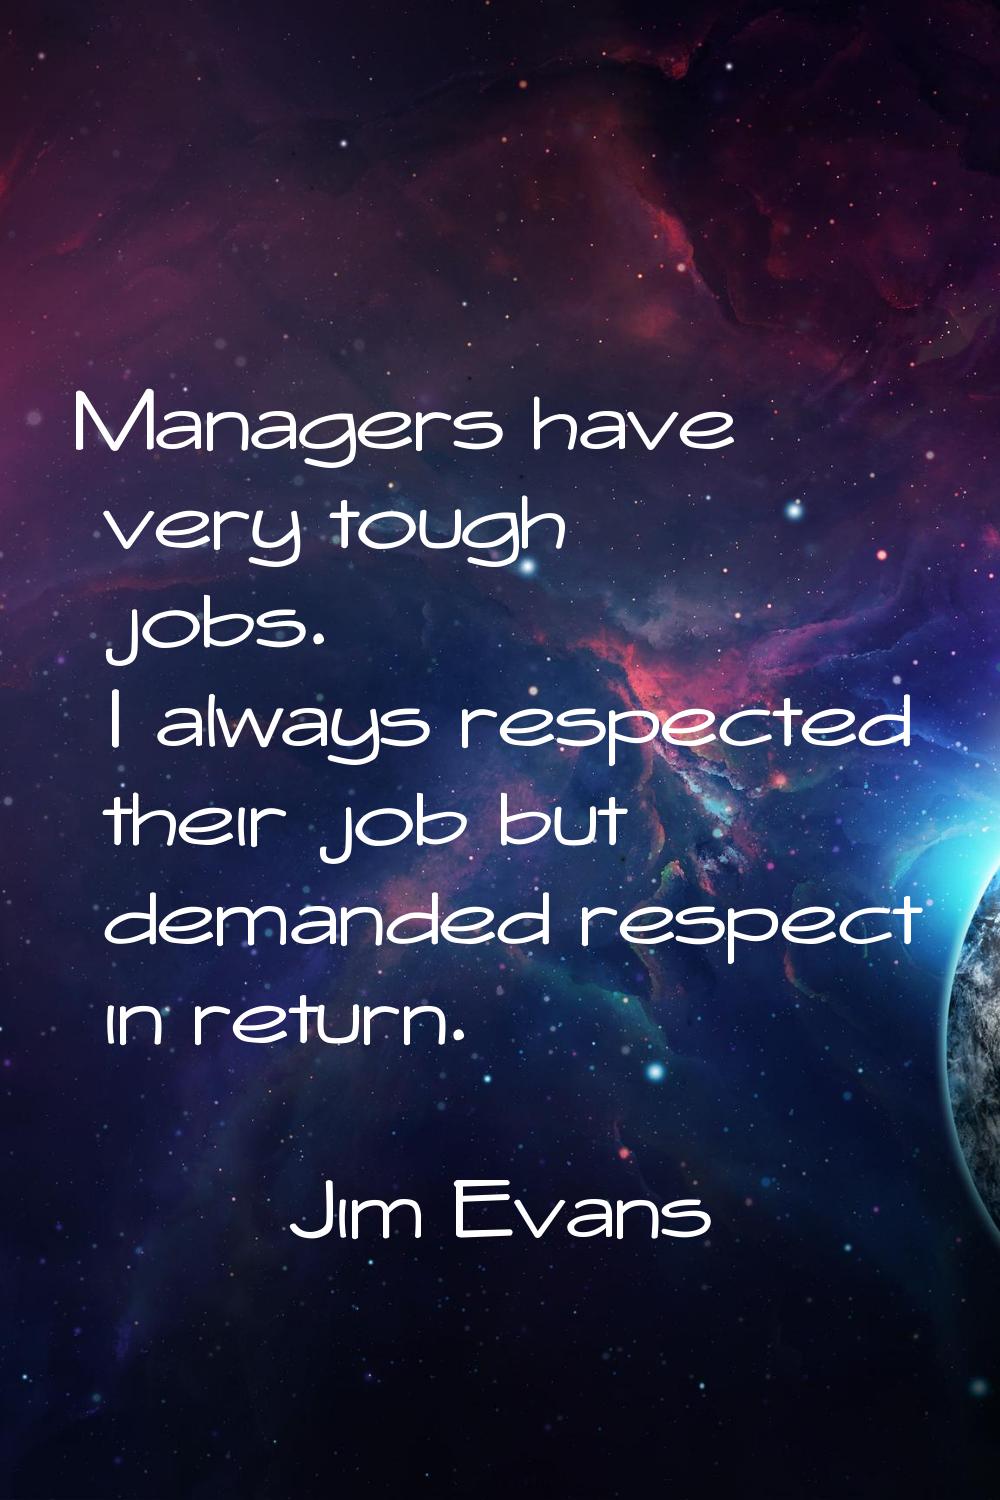 Managers have very tough jobs. I always respected their job but demanded respect in return.